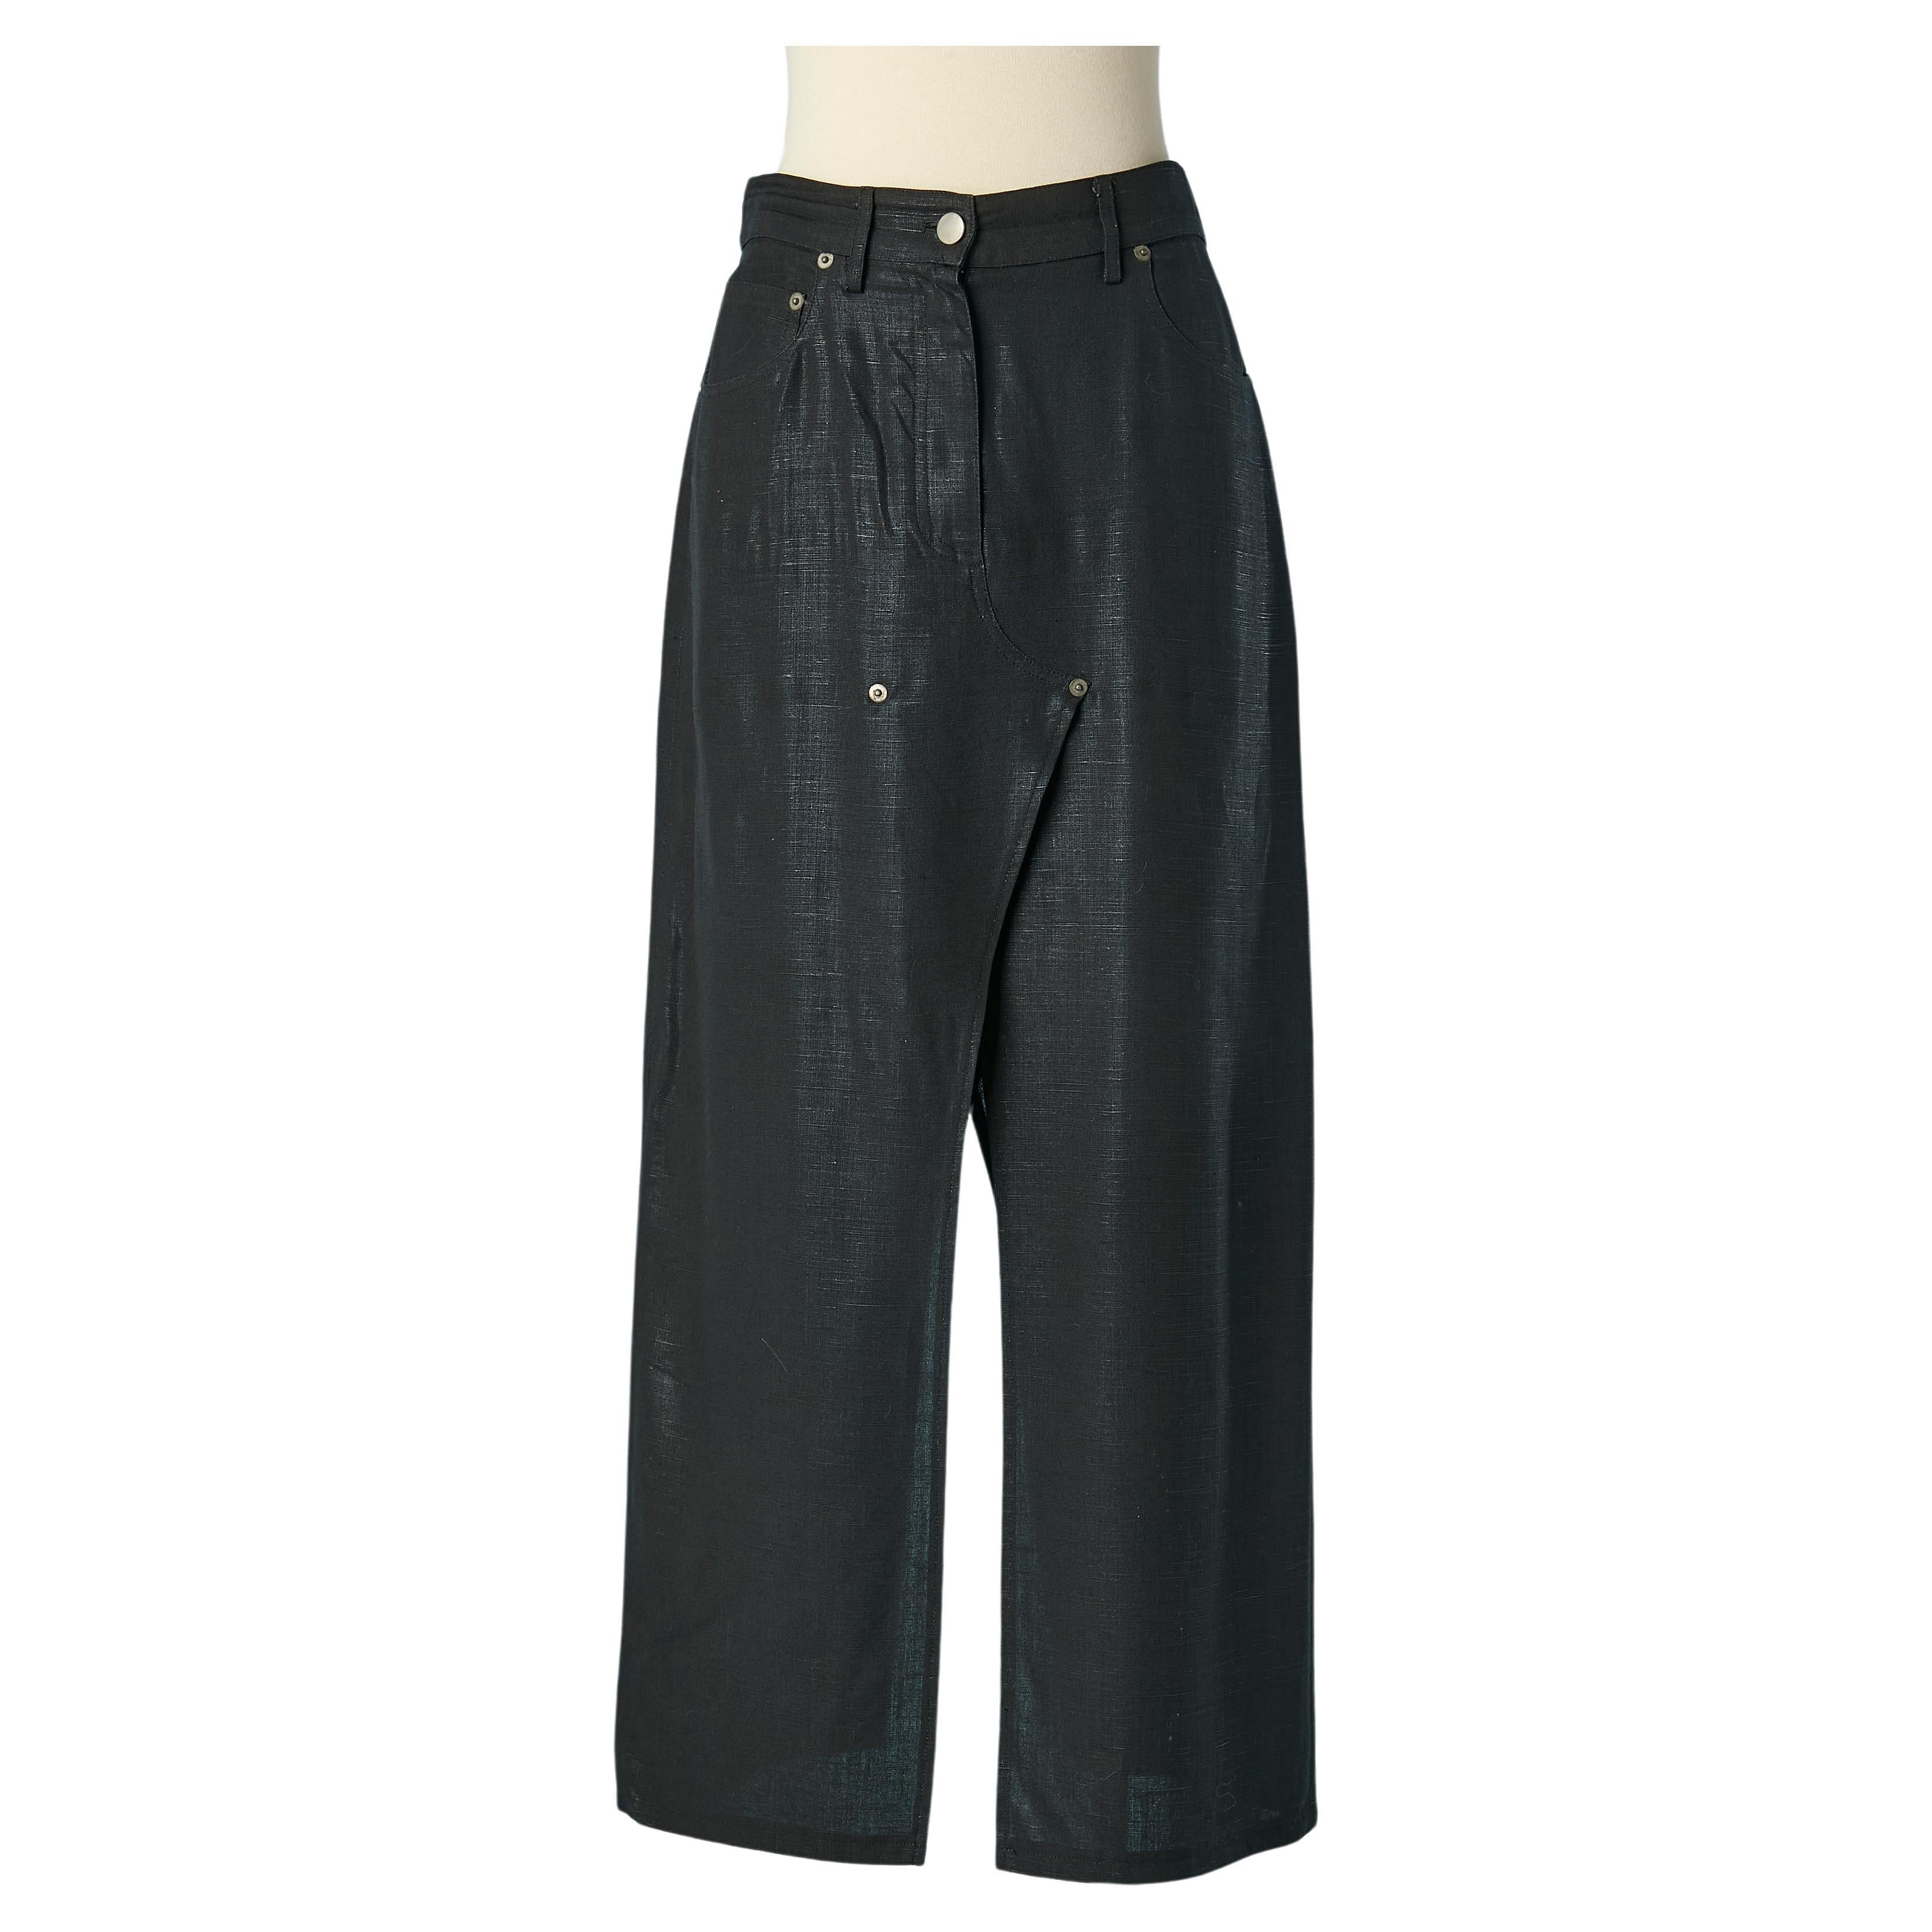 Black shiny rayon and linen skirt-trouser John Galliano  For Sale